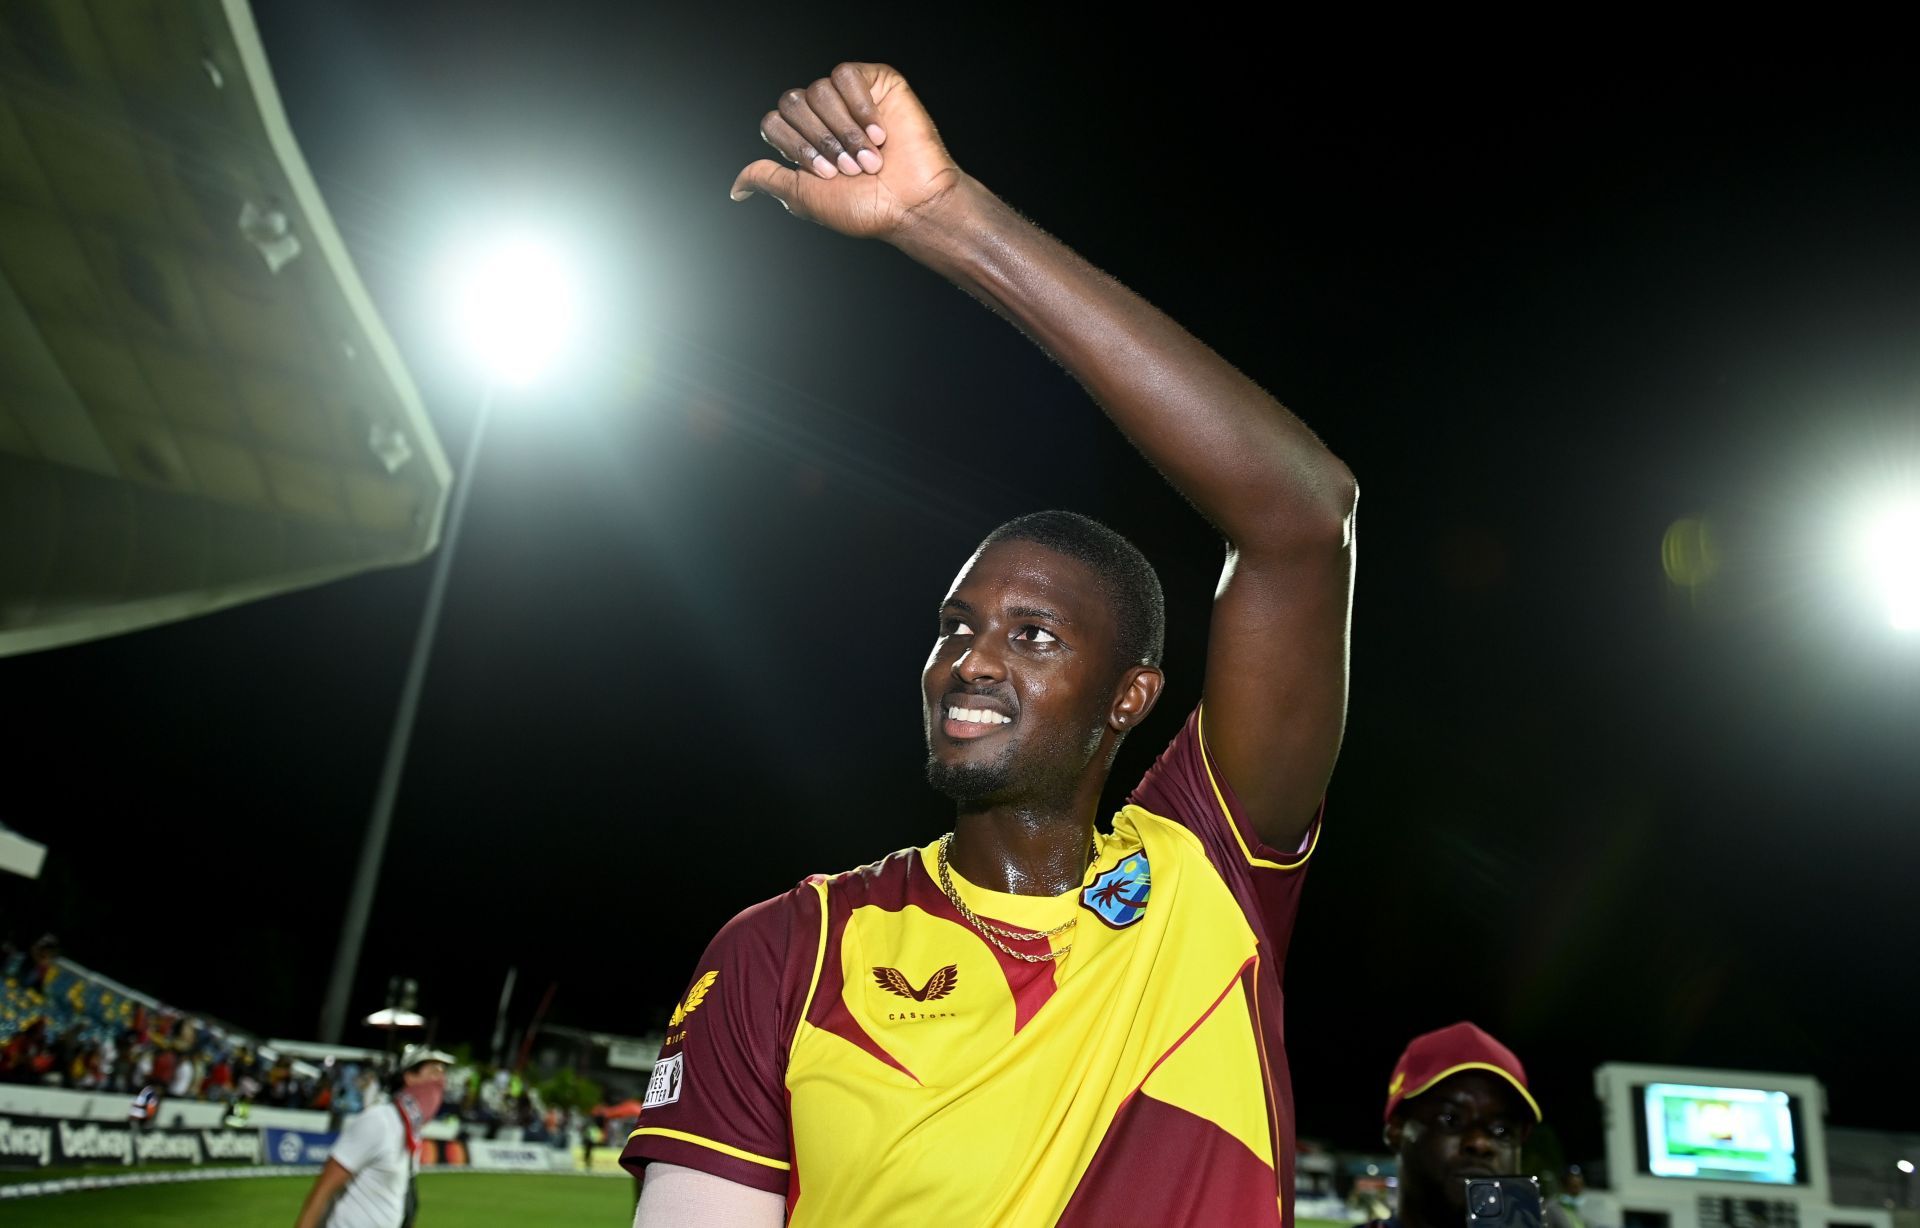 Jason Holder has been superb in T20Is for West Indies